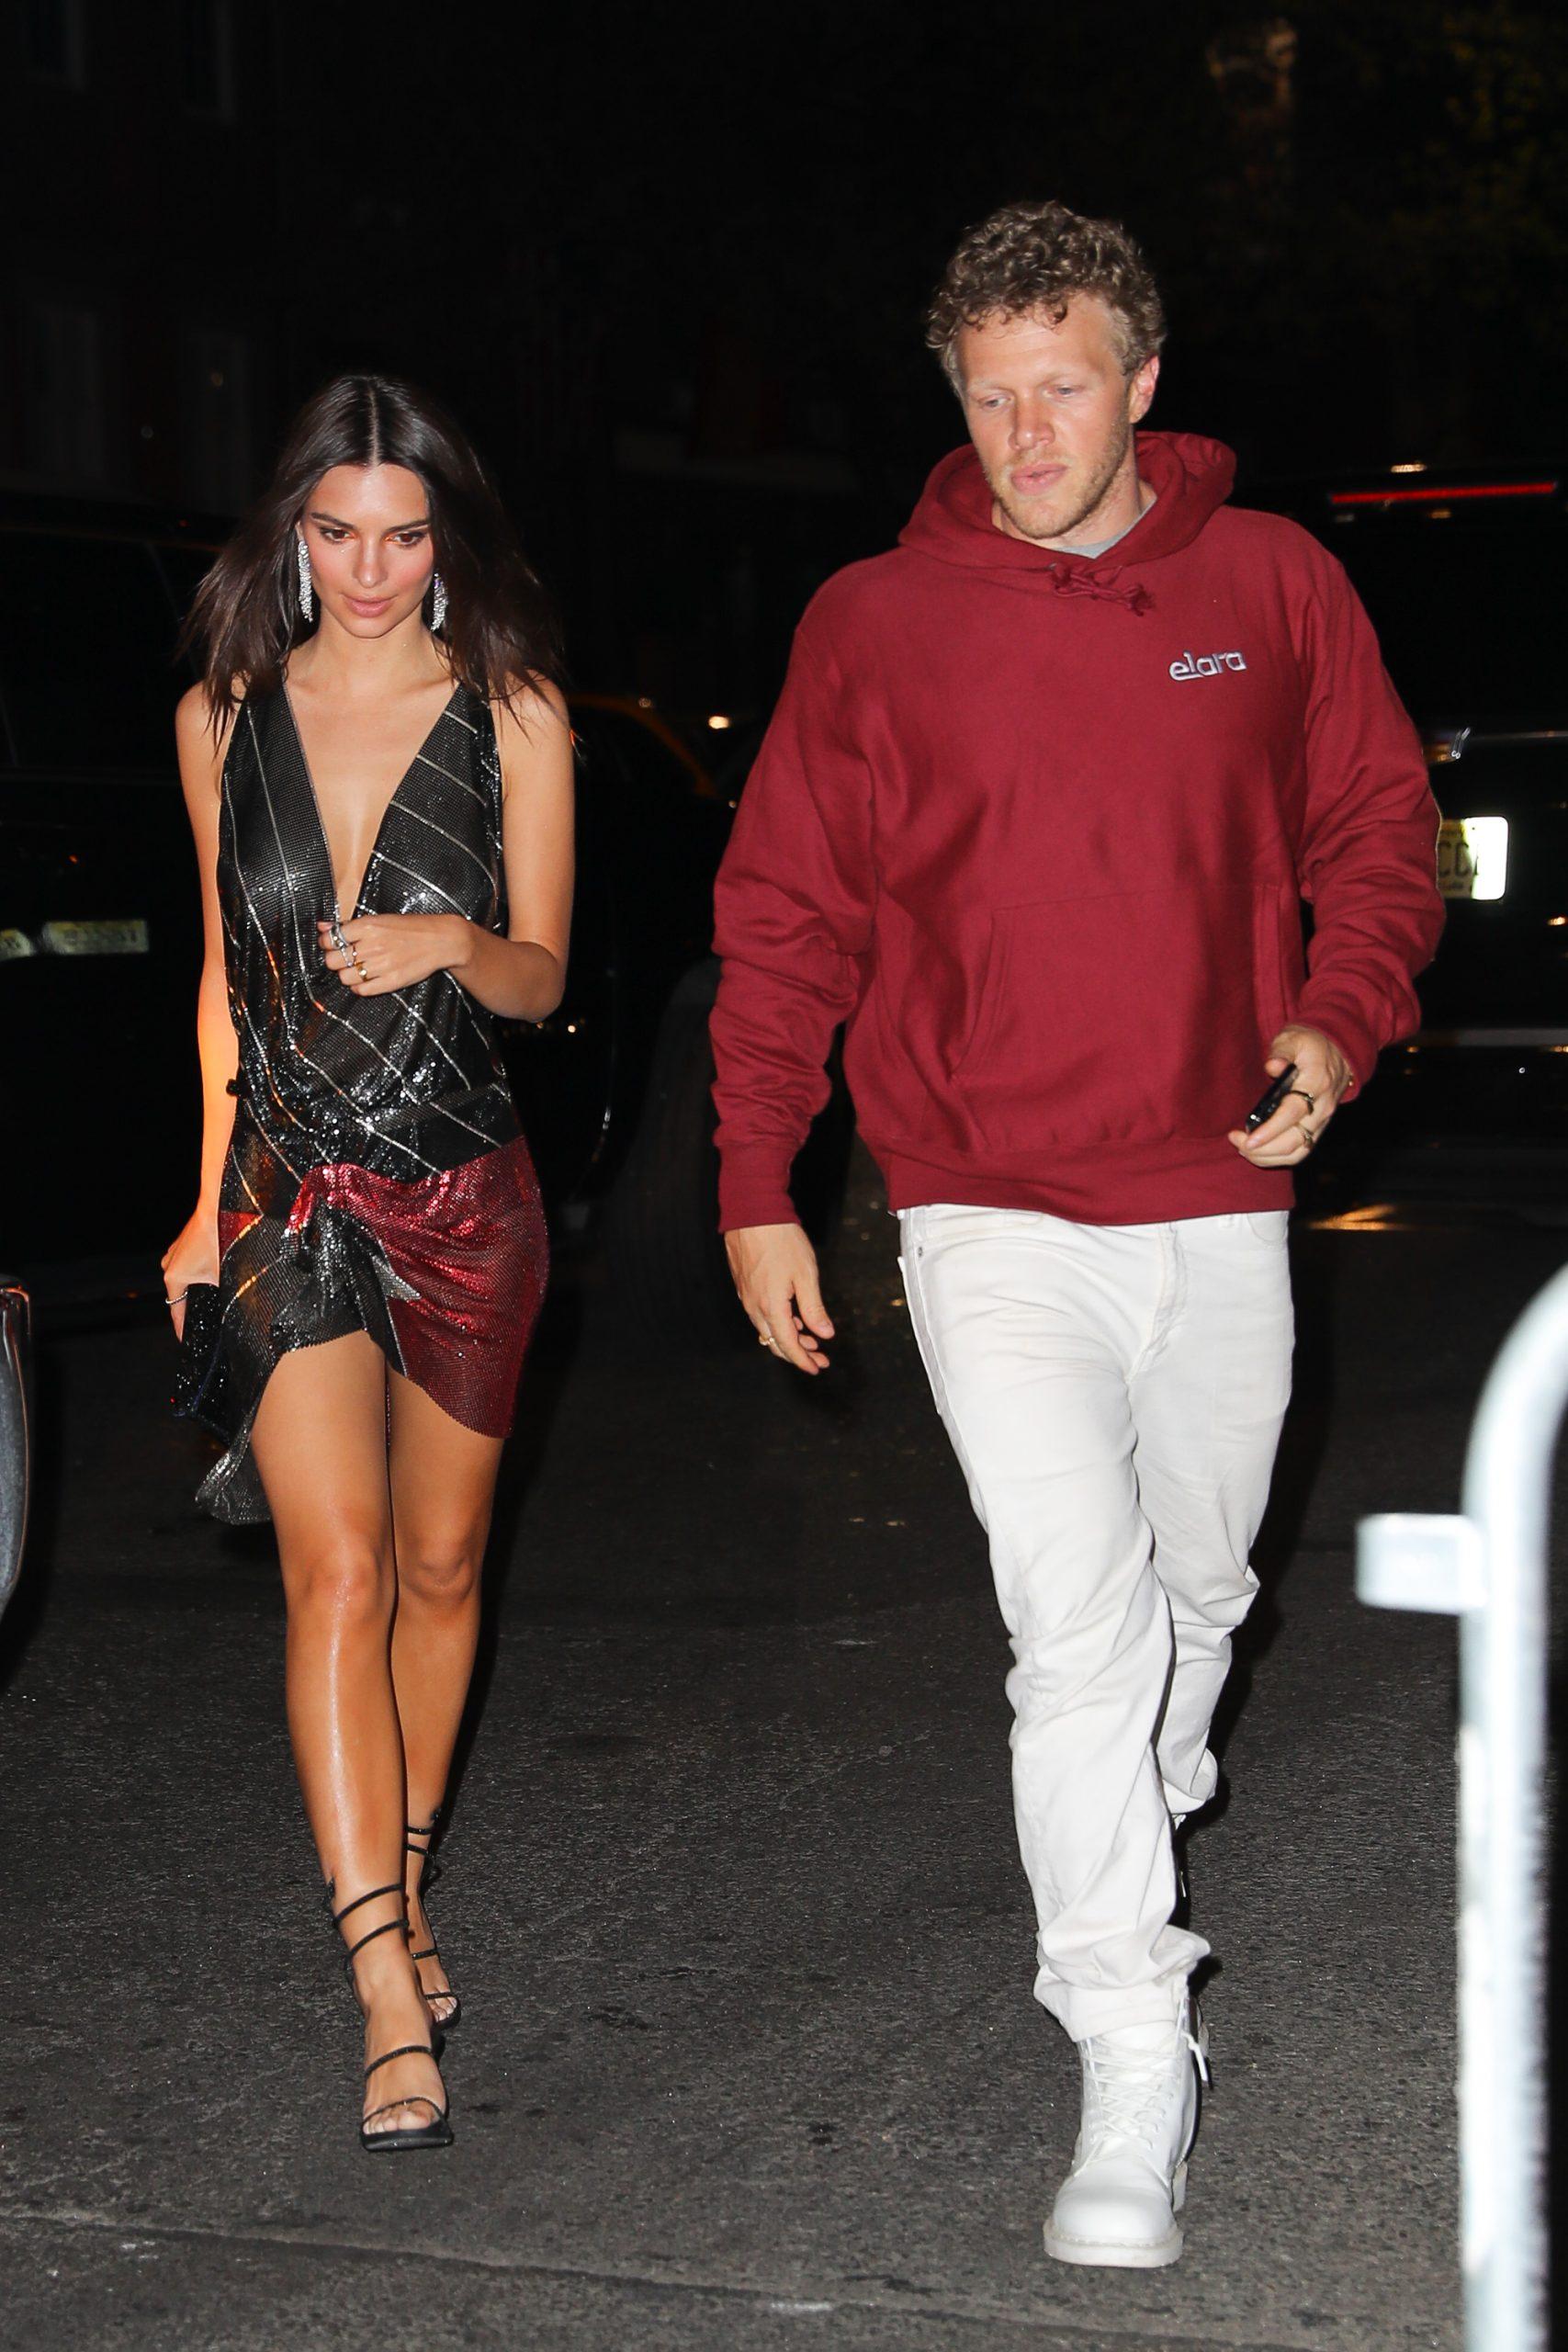 Emily Ratajkowski and husband Sebastian Bear-McClard were spotted arriving at the Rihanna apos s Met Gala 2018 After Party in NYC